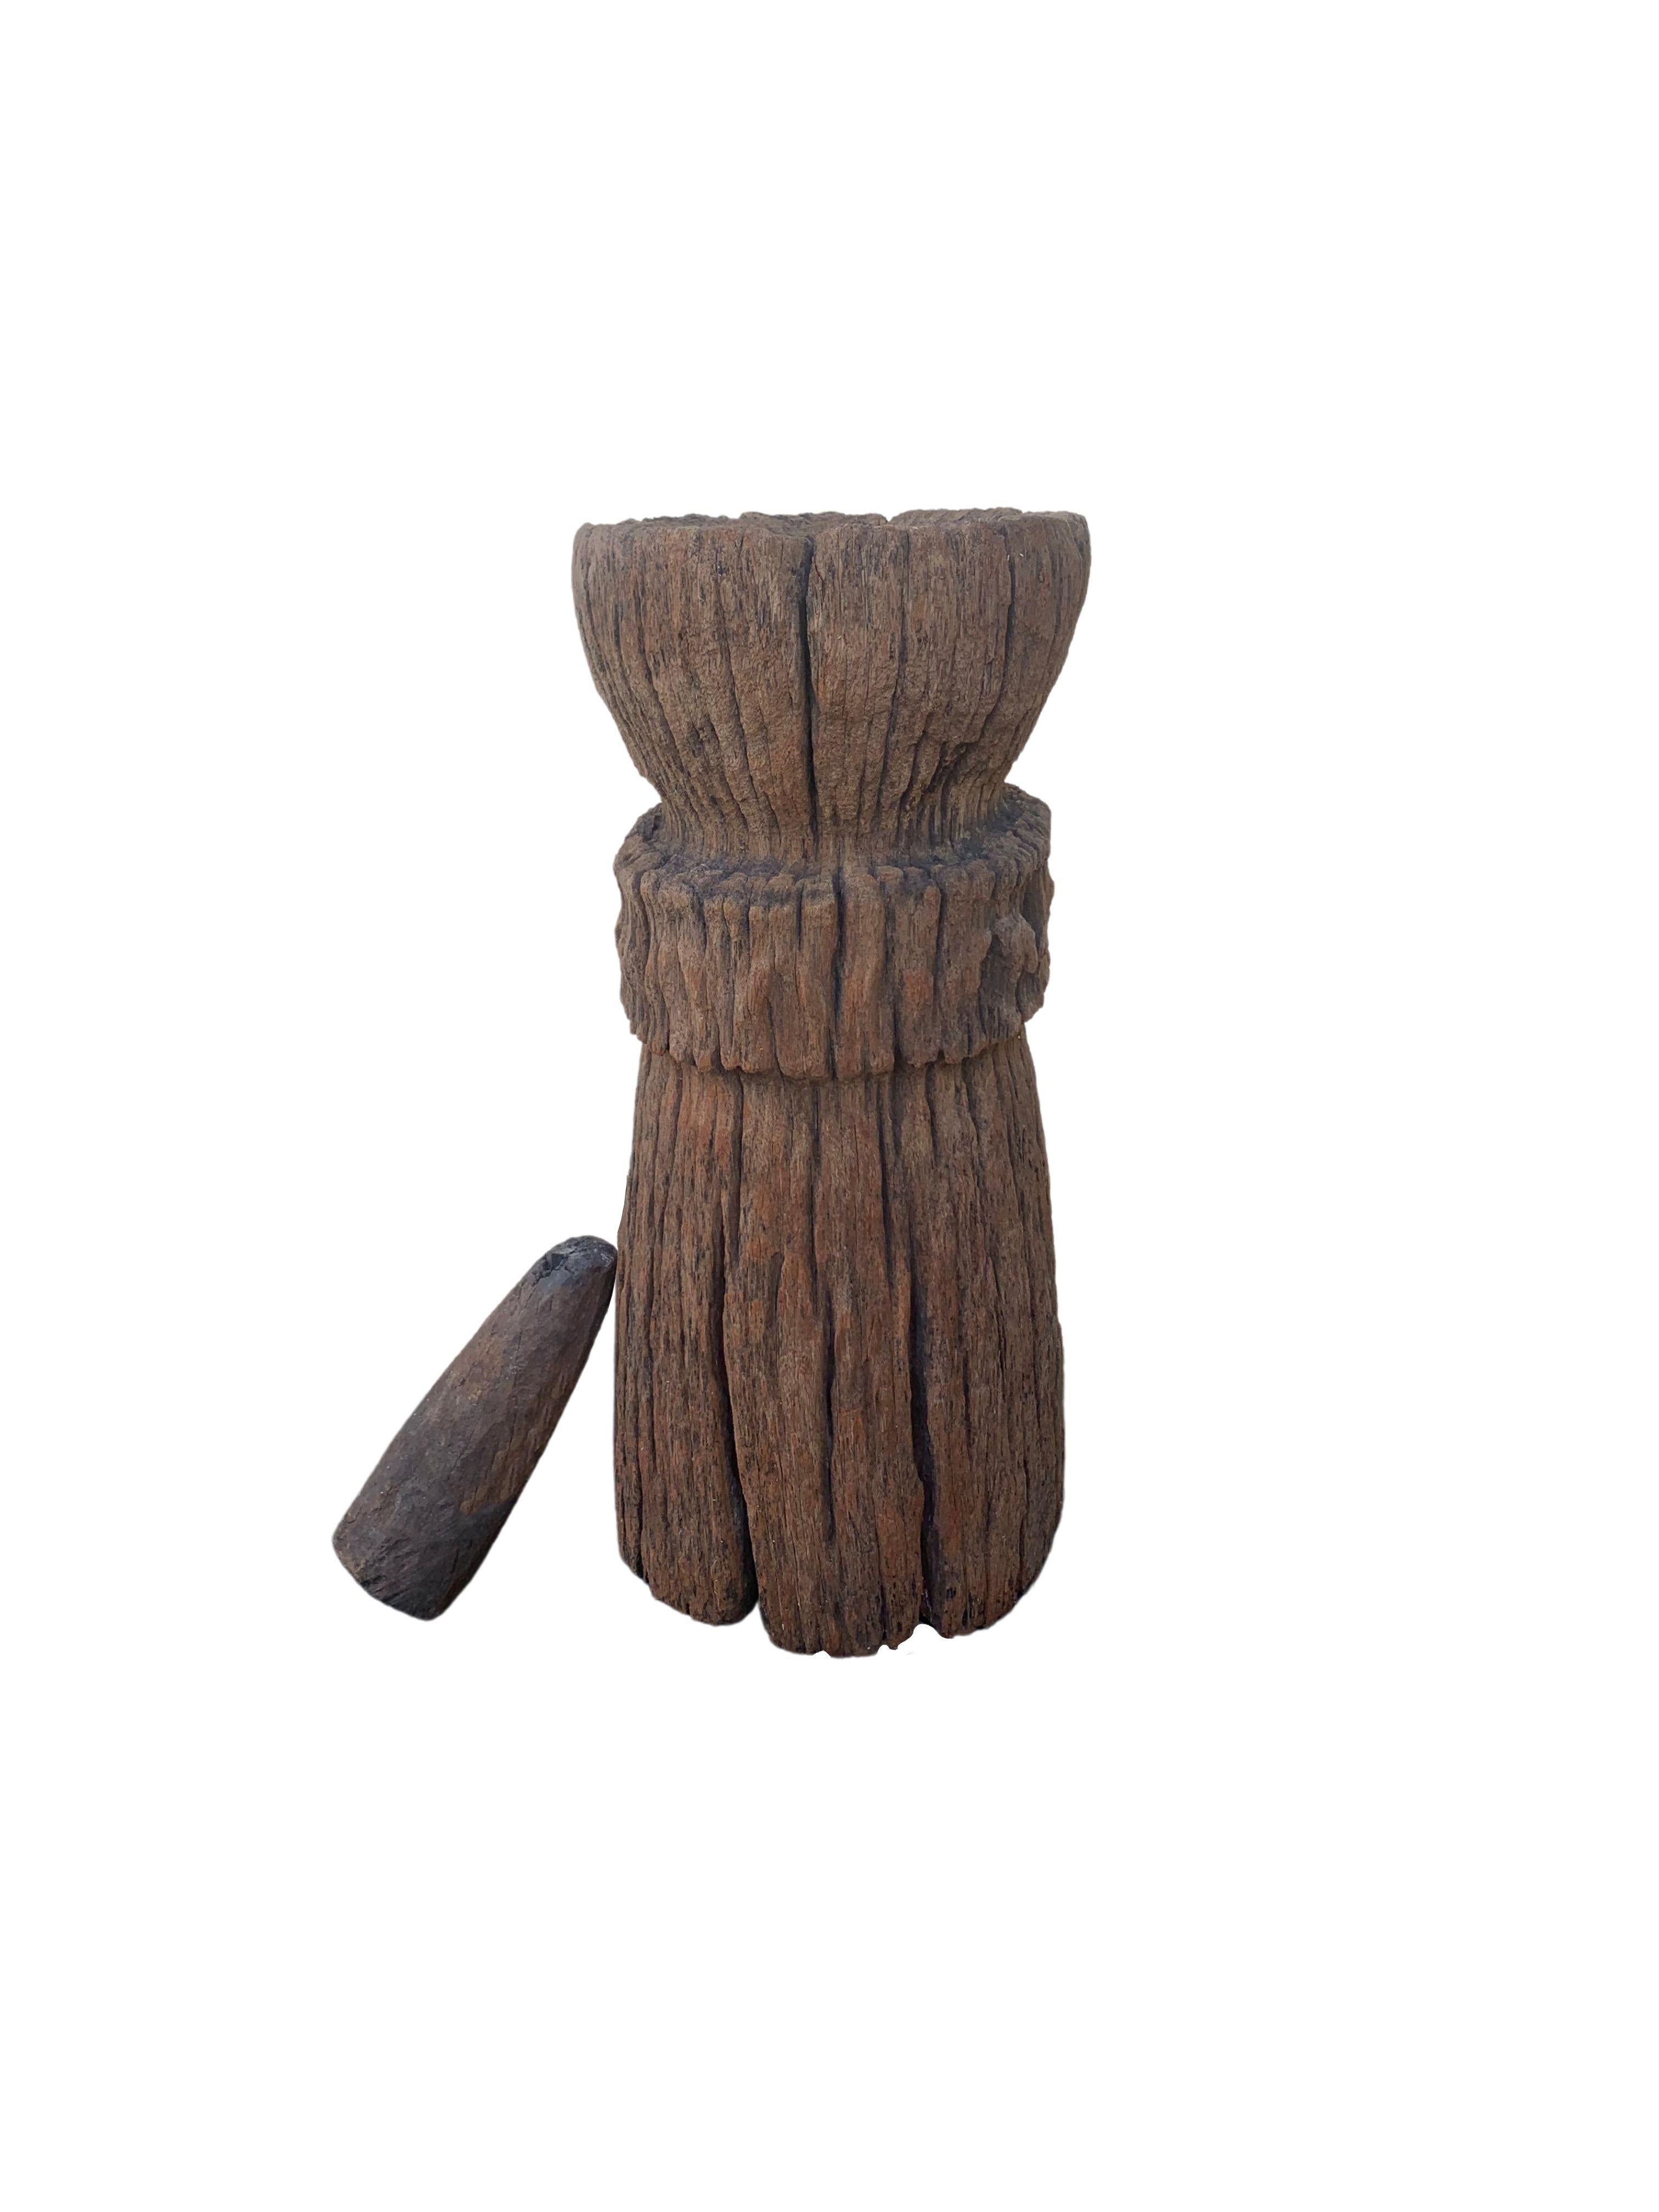 A visibly old mortar soured from rural Java & crafted from a solid teak wood slab. A raw and organic object with beautiful wood textures and imperfections. A versatile decorative object to bring warmth and life to any space, despite its once